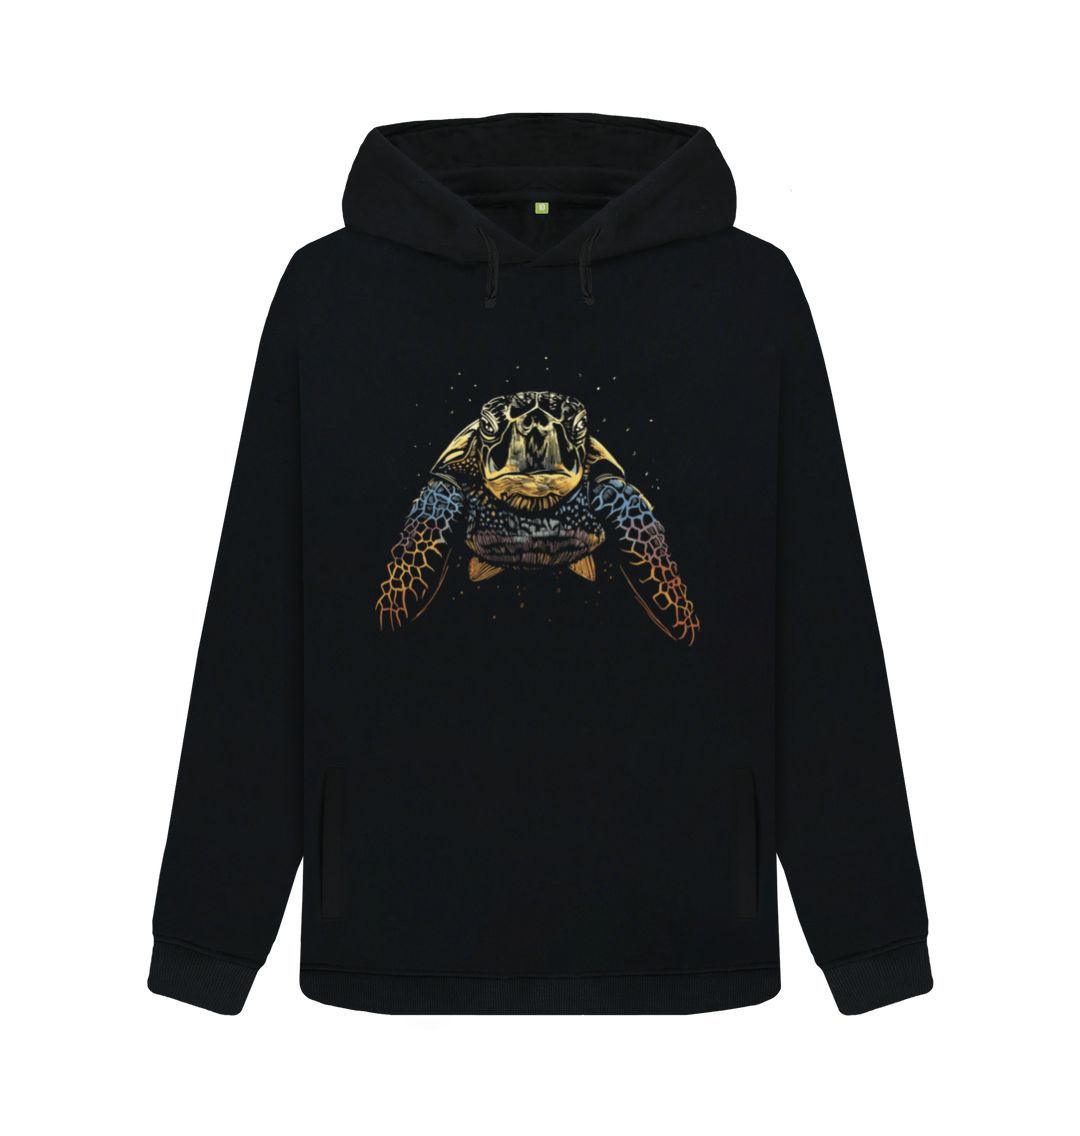 Black The Colour Turtle Women's Pullover Hoody